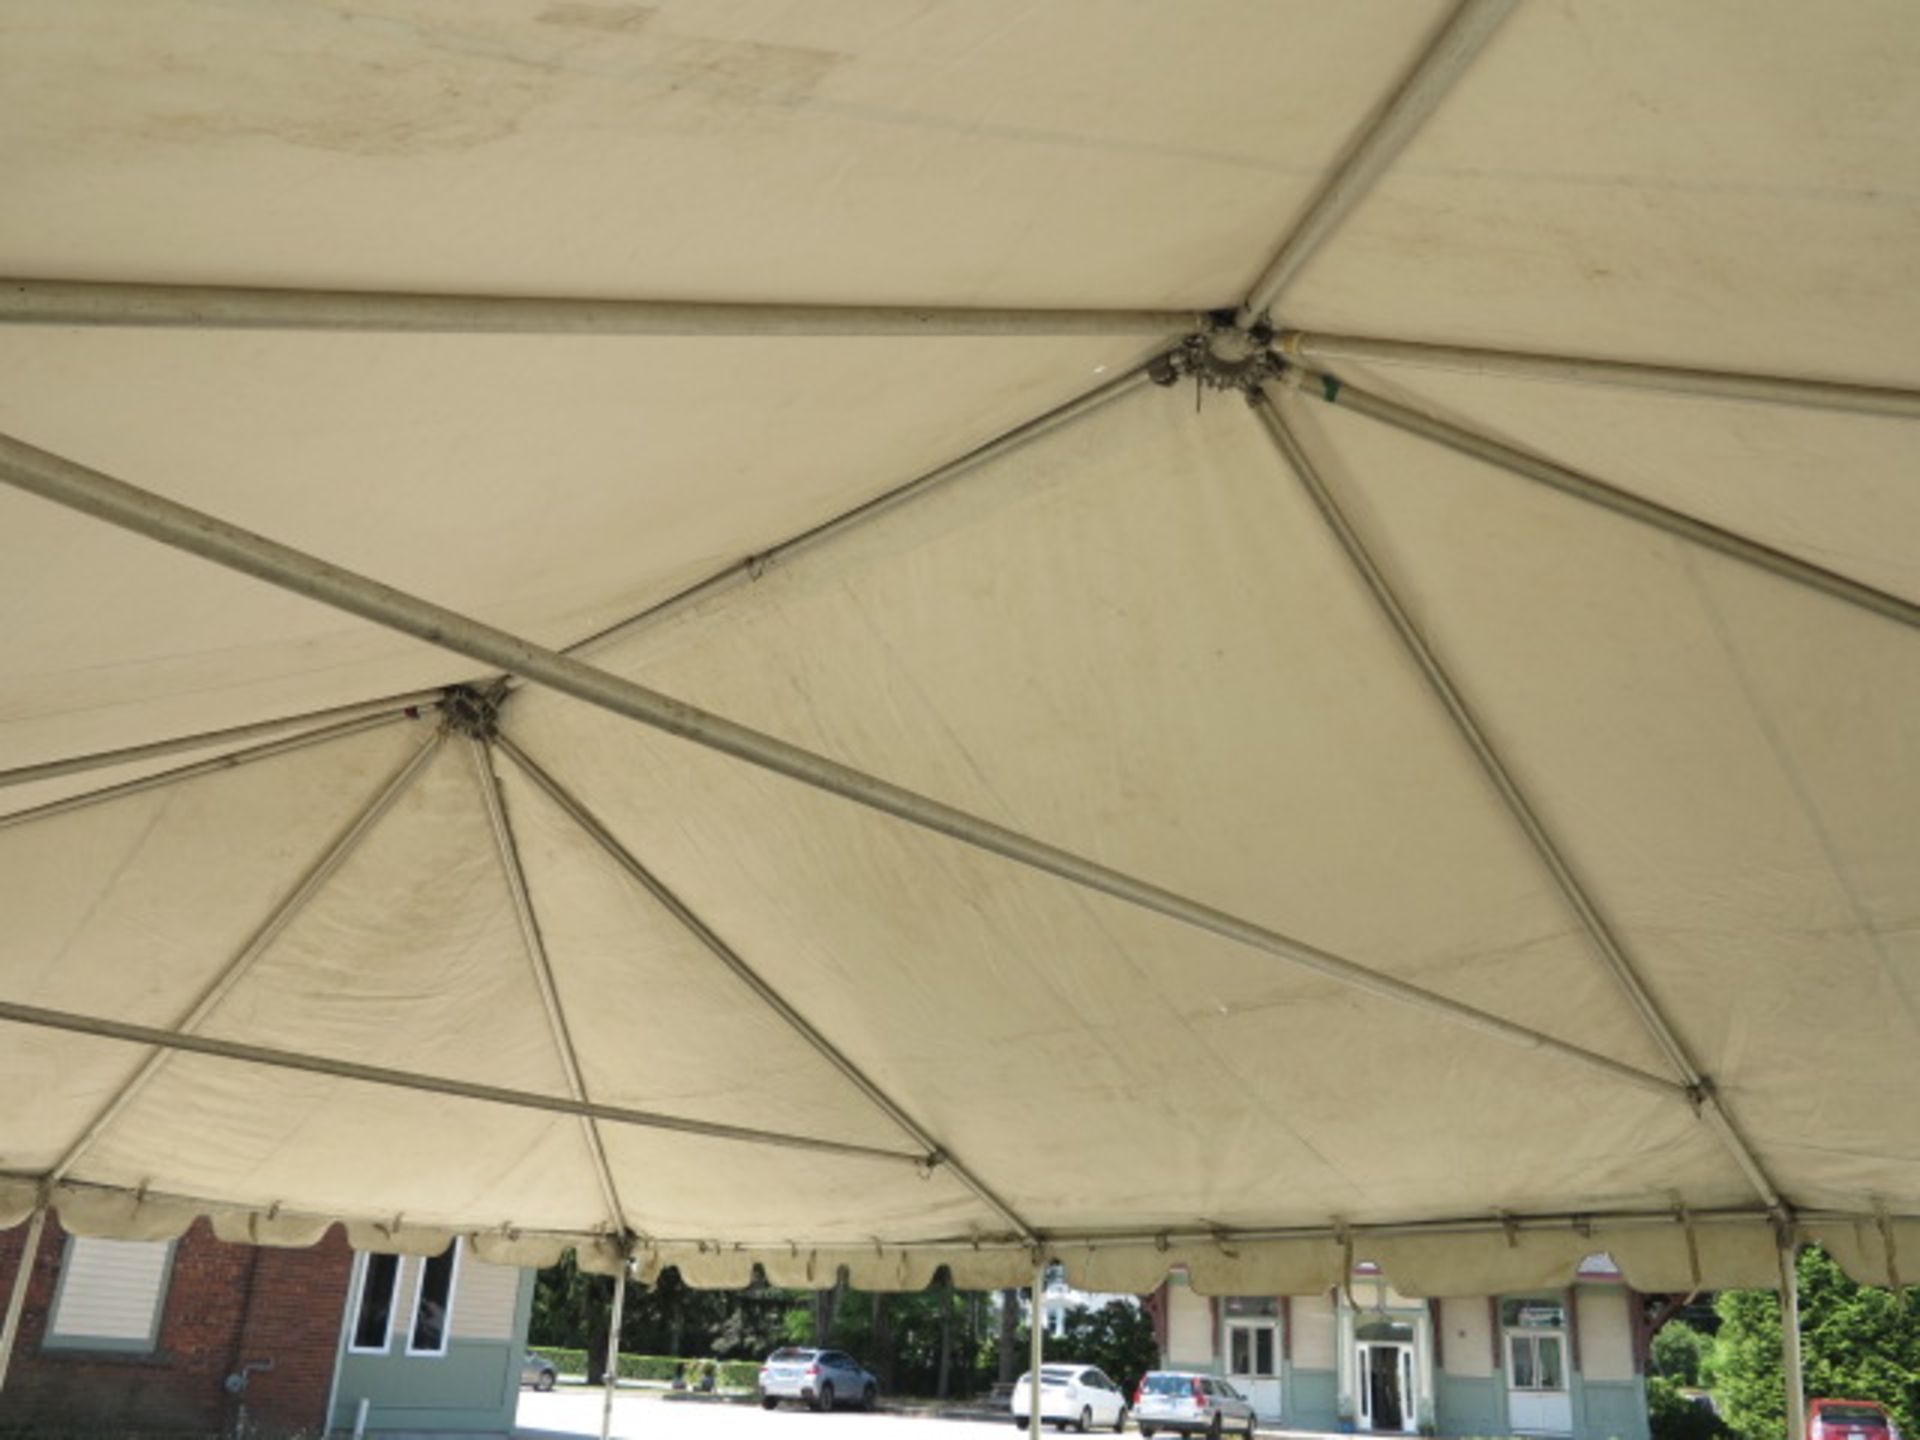 20' x 30' White Tent w/ Hardware Any images provided are for bidder's guidance only. See Terms of - Image 6 of 7